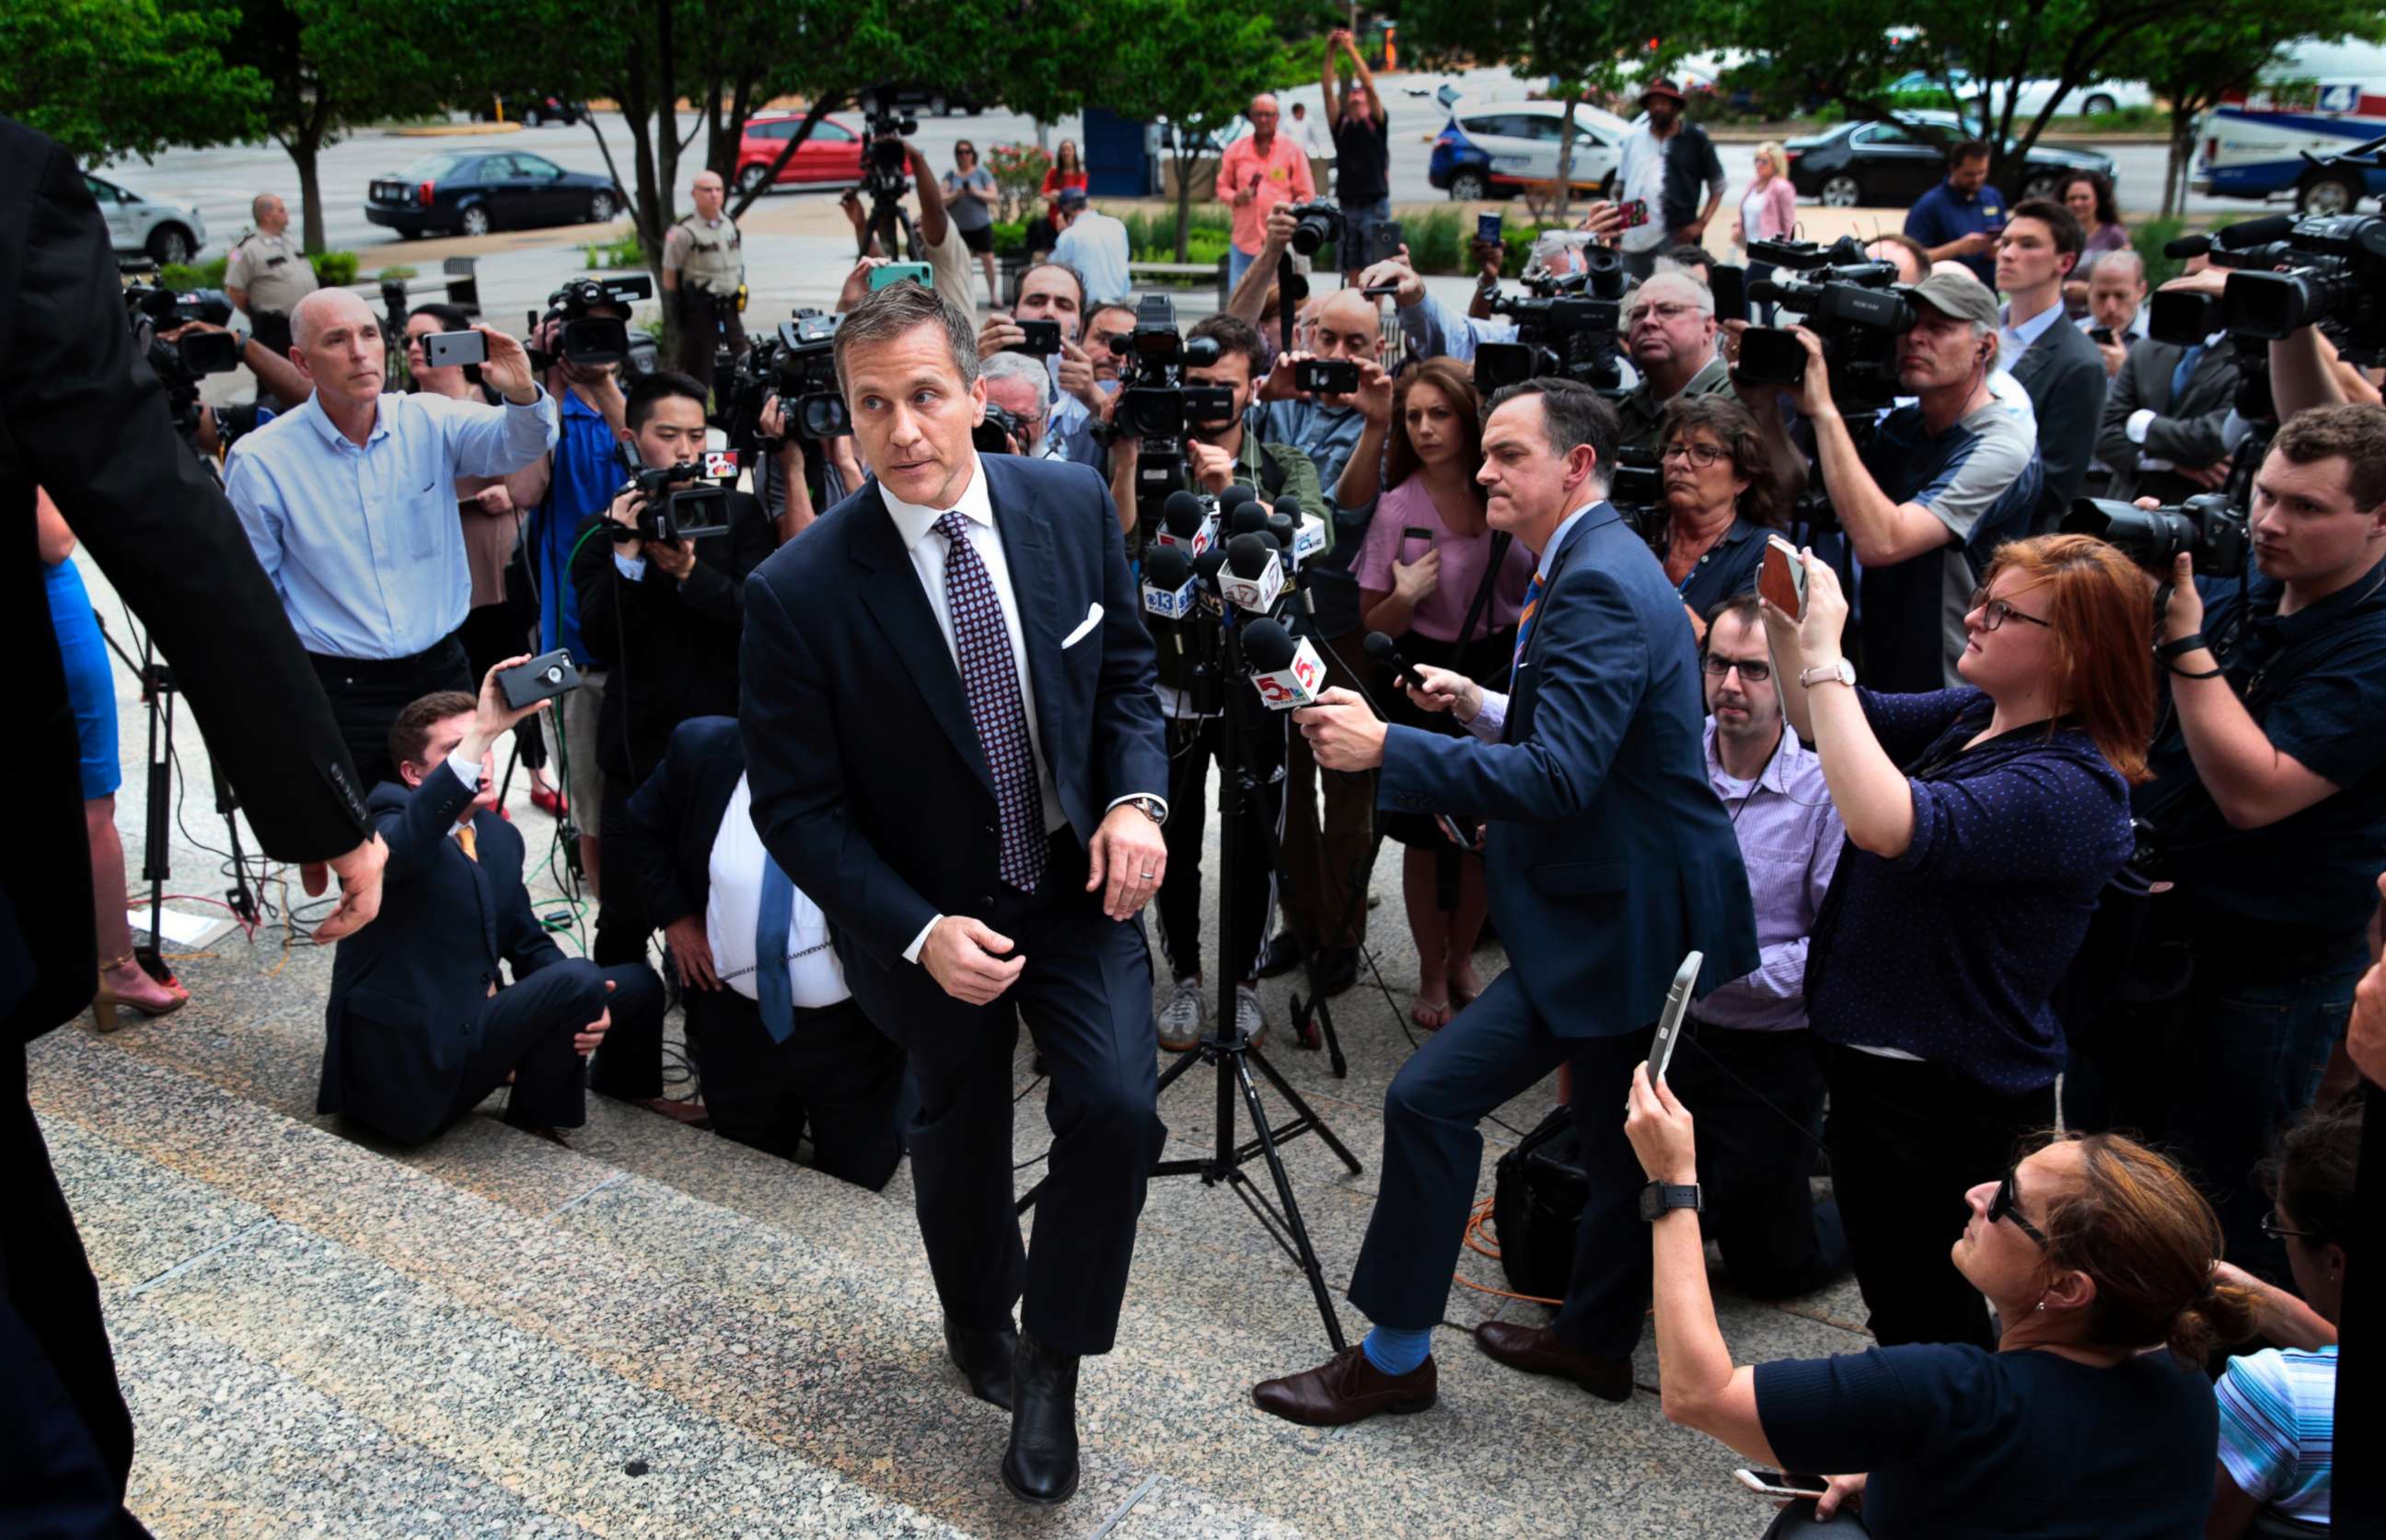 PHOTO: Missouri Gov. Eric Greitens leaves the Civil Courts building after prosecutors abruptly dropped a felony invasion-of-privacy charge alleging he had taken a revealing photo of a woman with whom he has acknowledged having an affair, May 14, 2018.